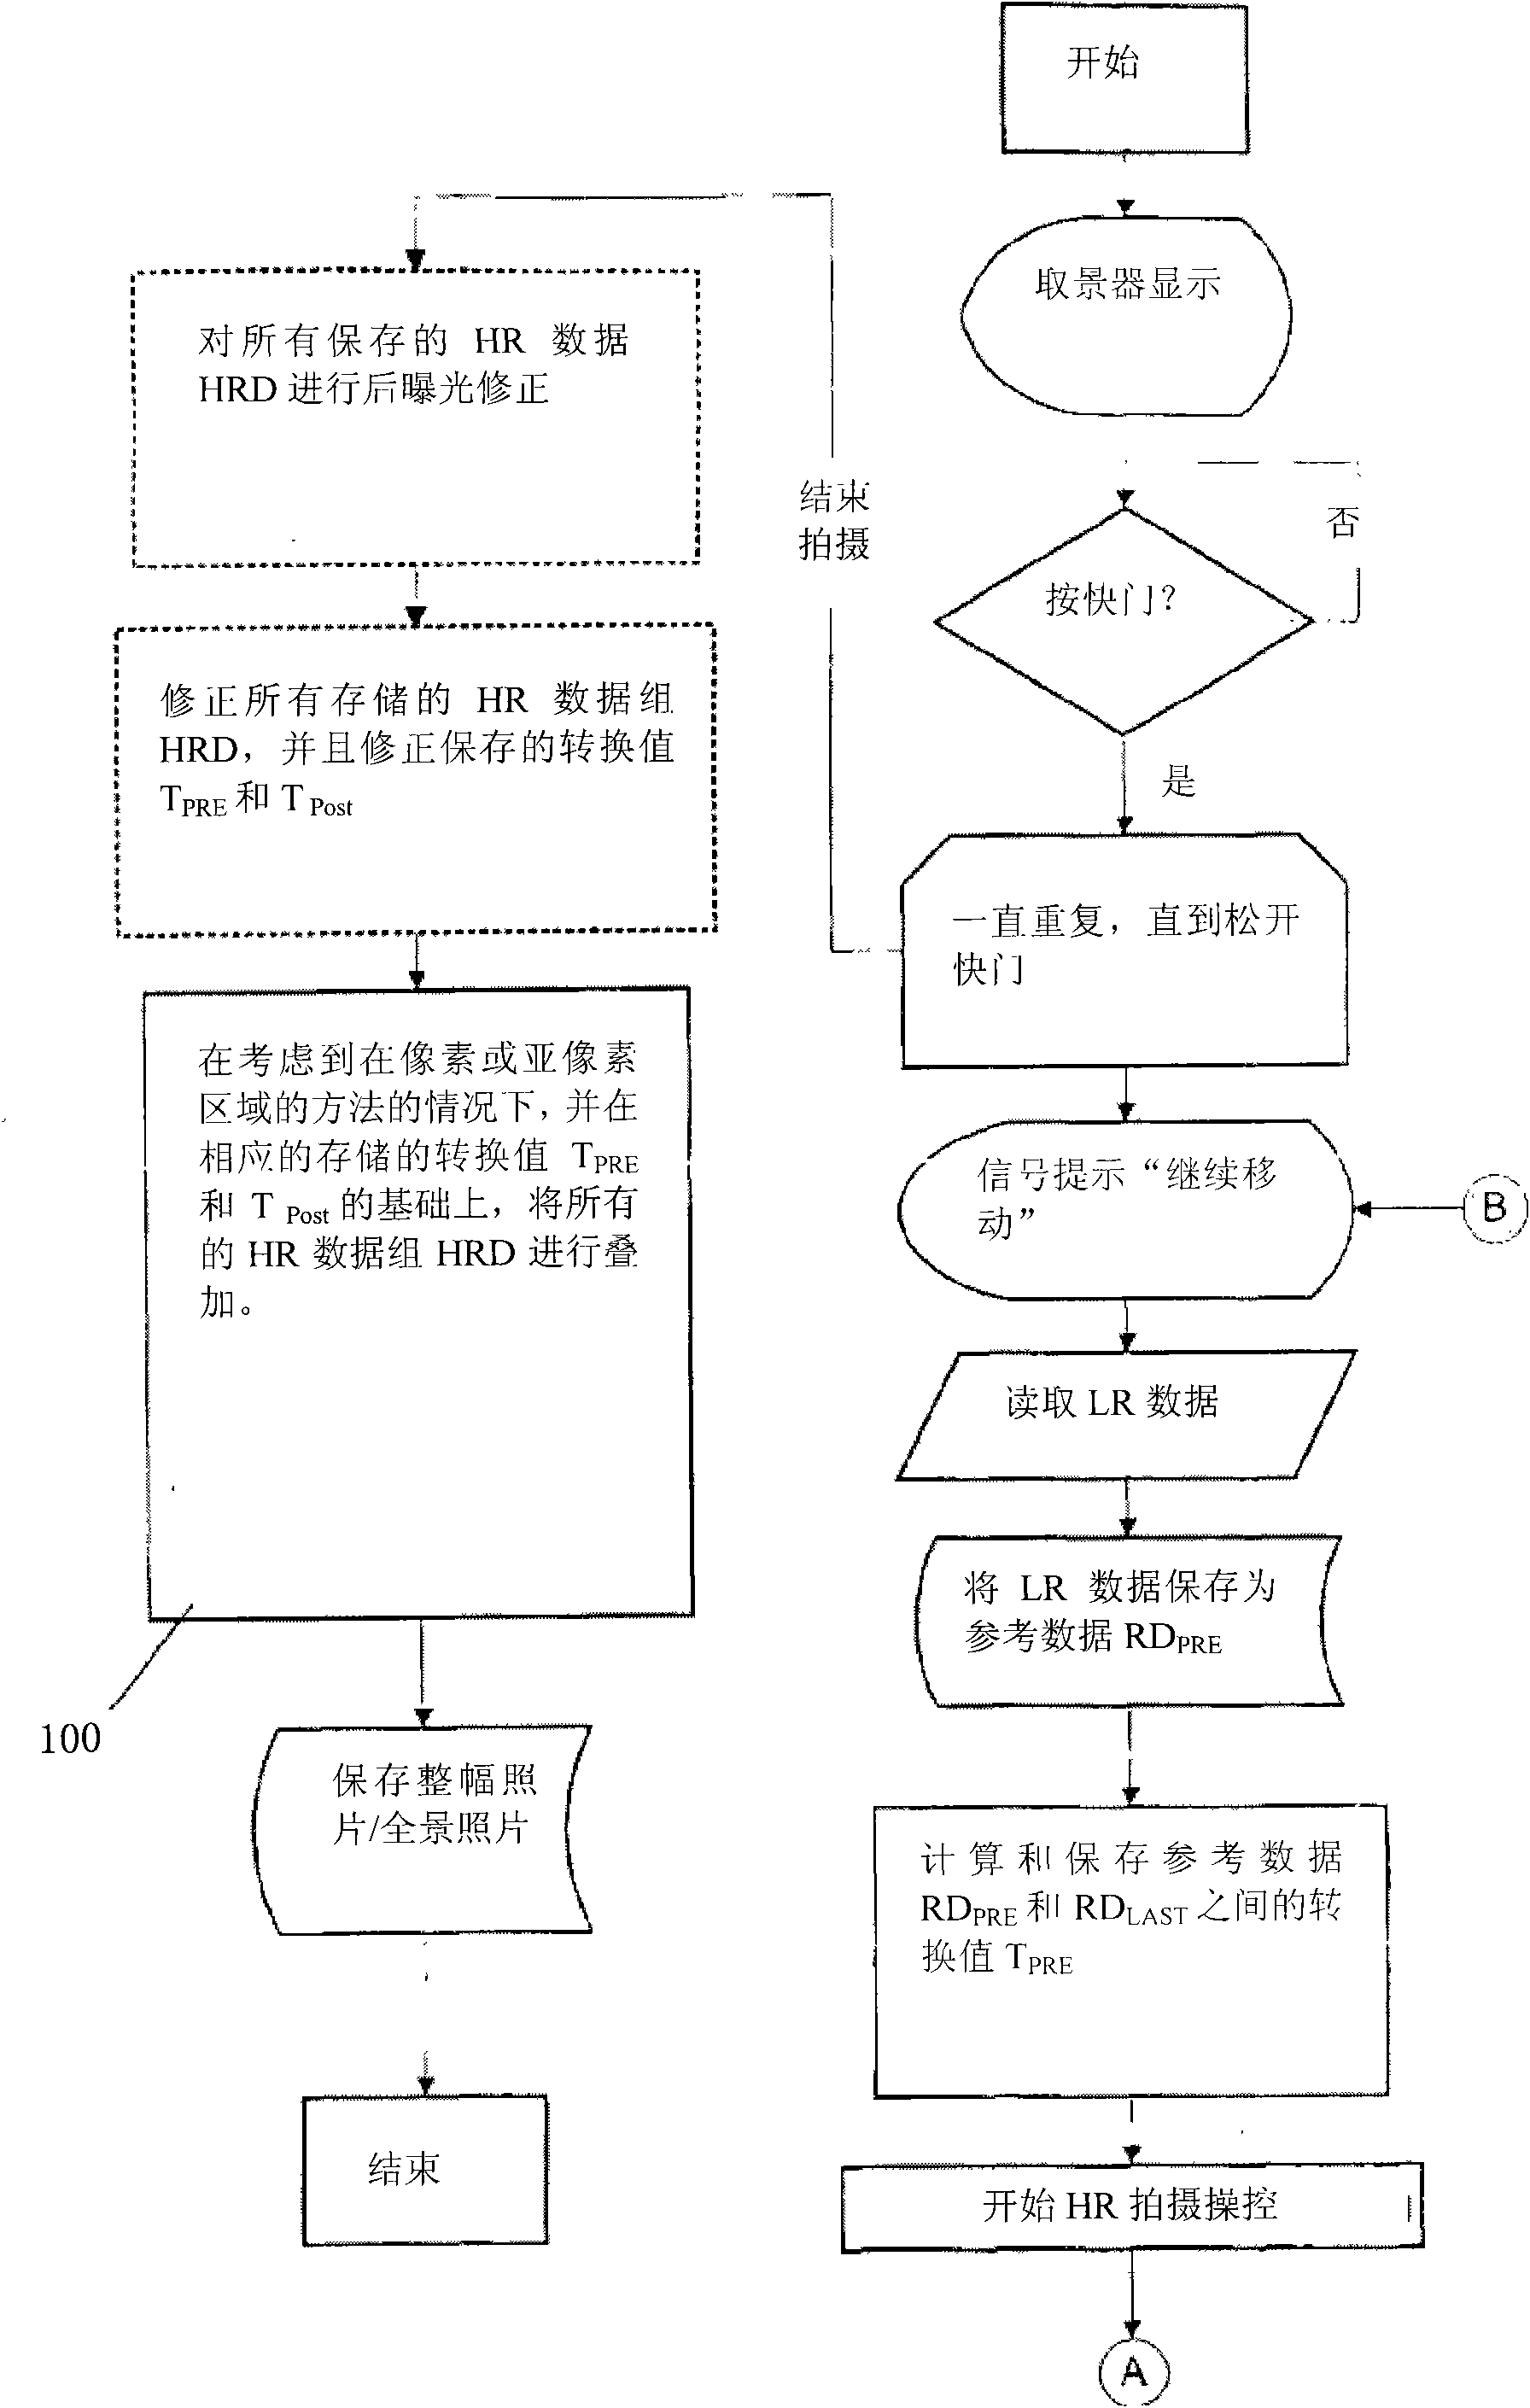 Method and arrangement for processing records of imaging sensors, corresponding computer program, and corresponding computer-readable storage medium